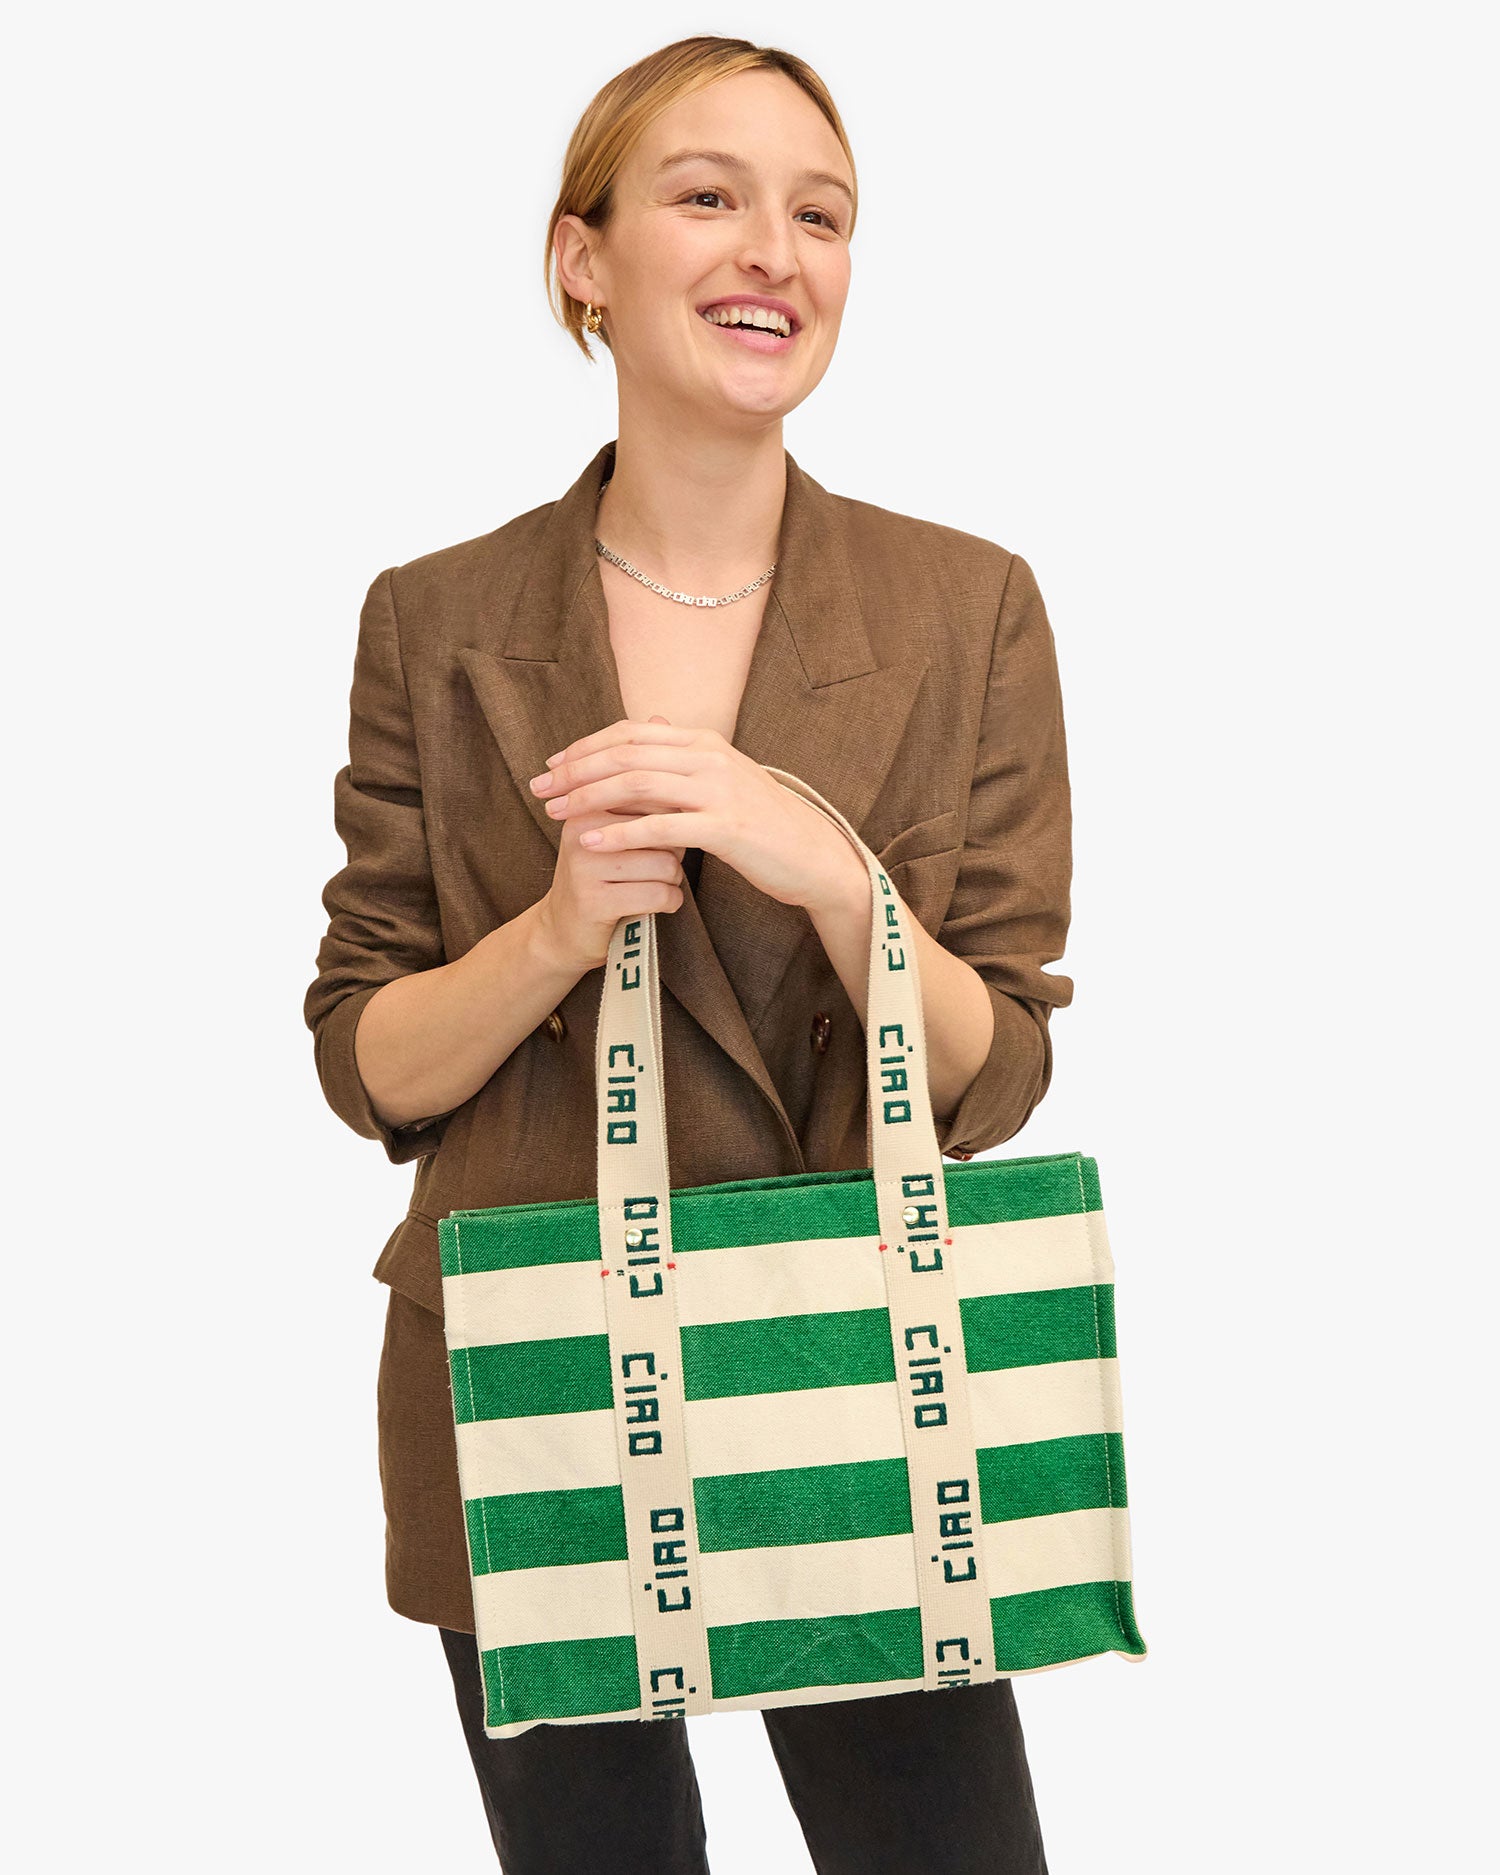 Zoe holds the Noemie Canvas Tote in Palm Green and Natural Stripe in her hands